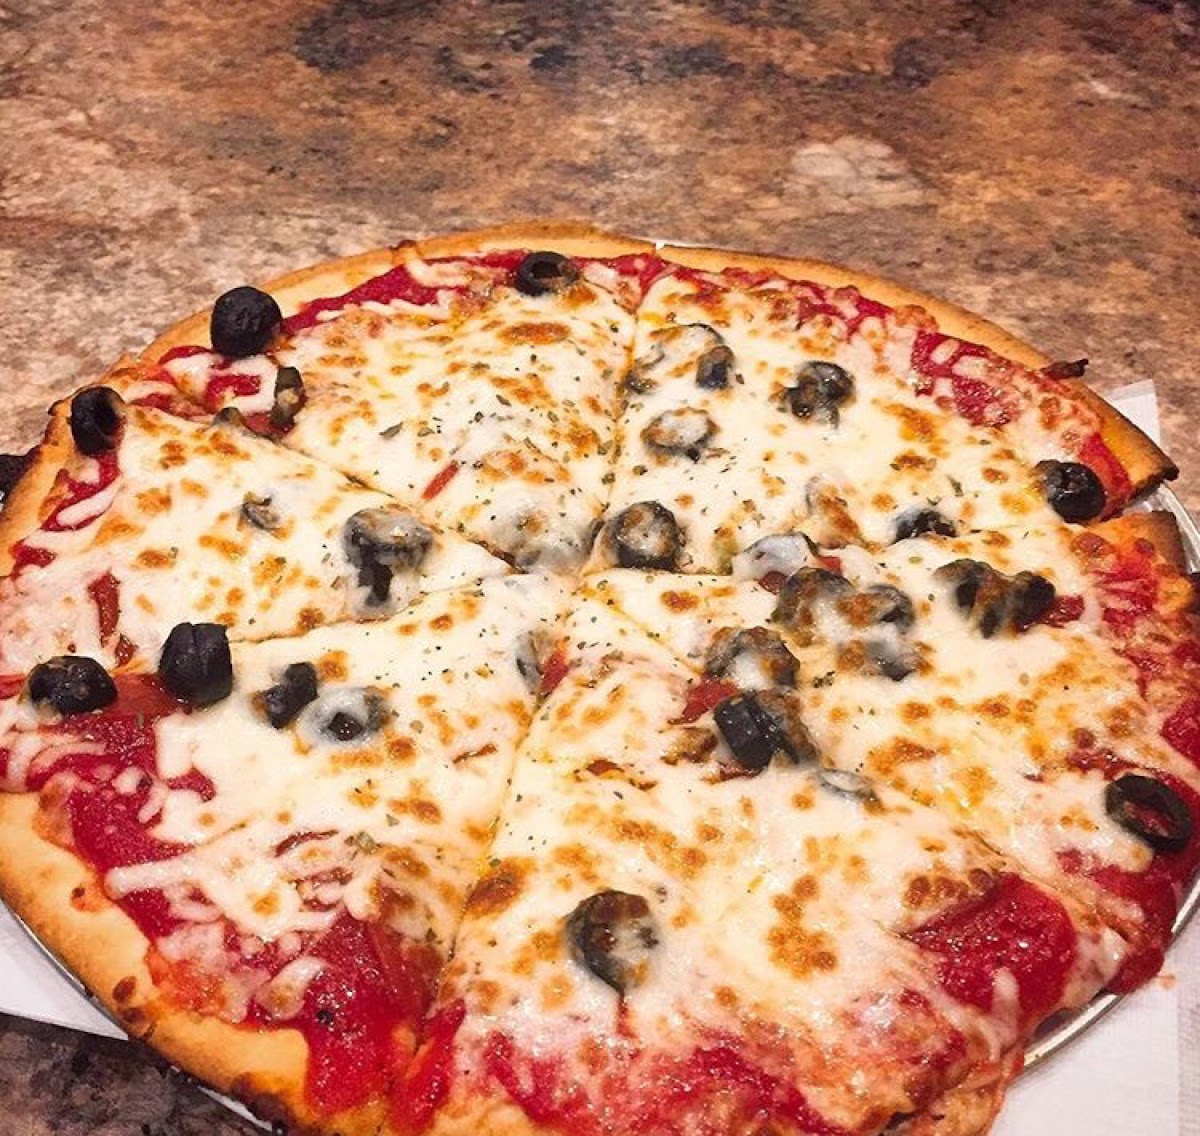 Pepperoni (under the cheese) & black olive goodness